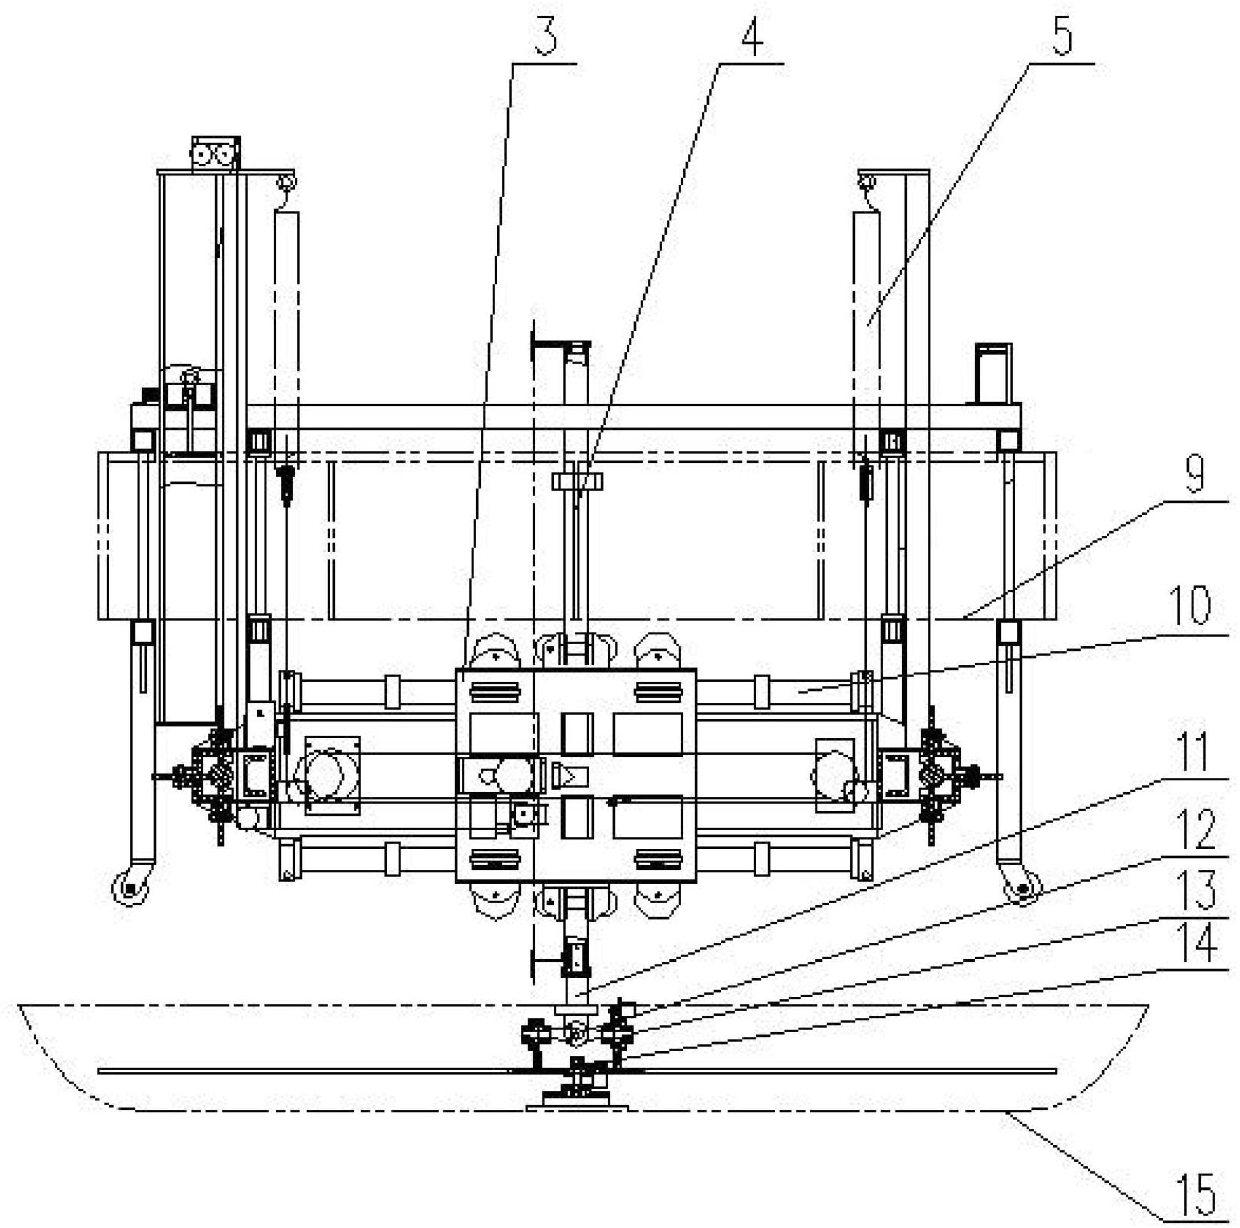 Motion and resistance testing device for ship and marine structures